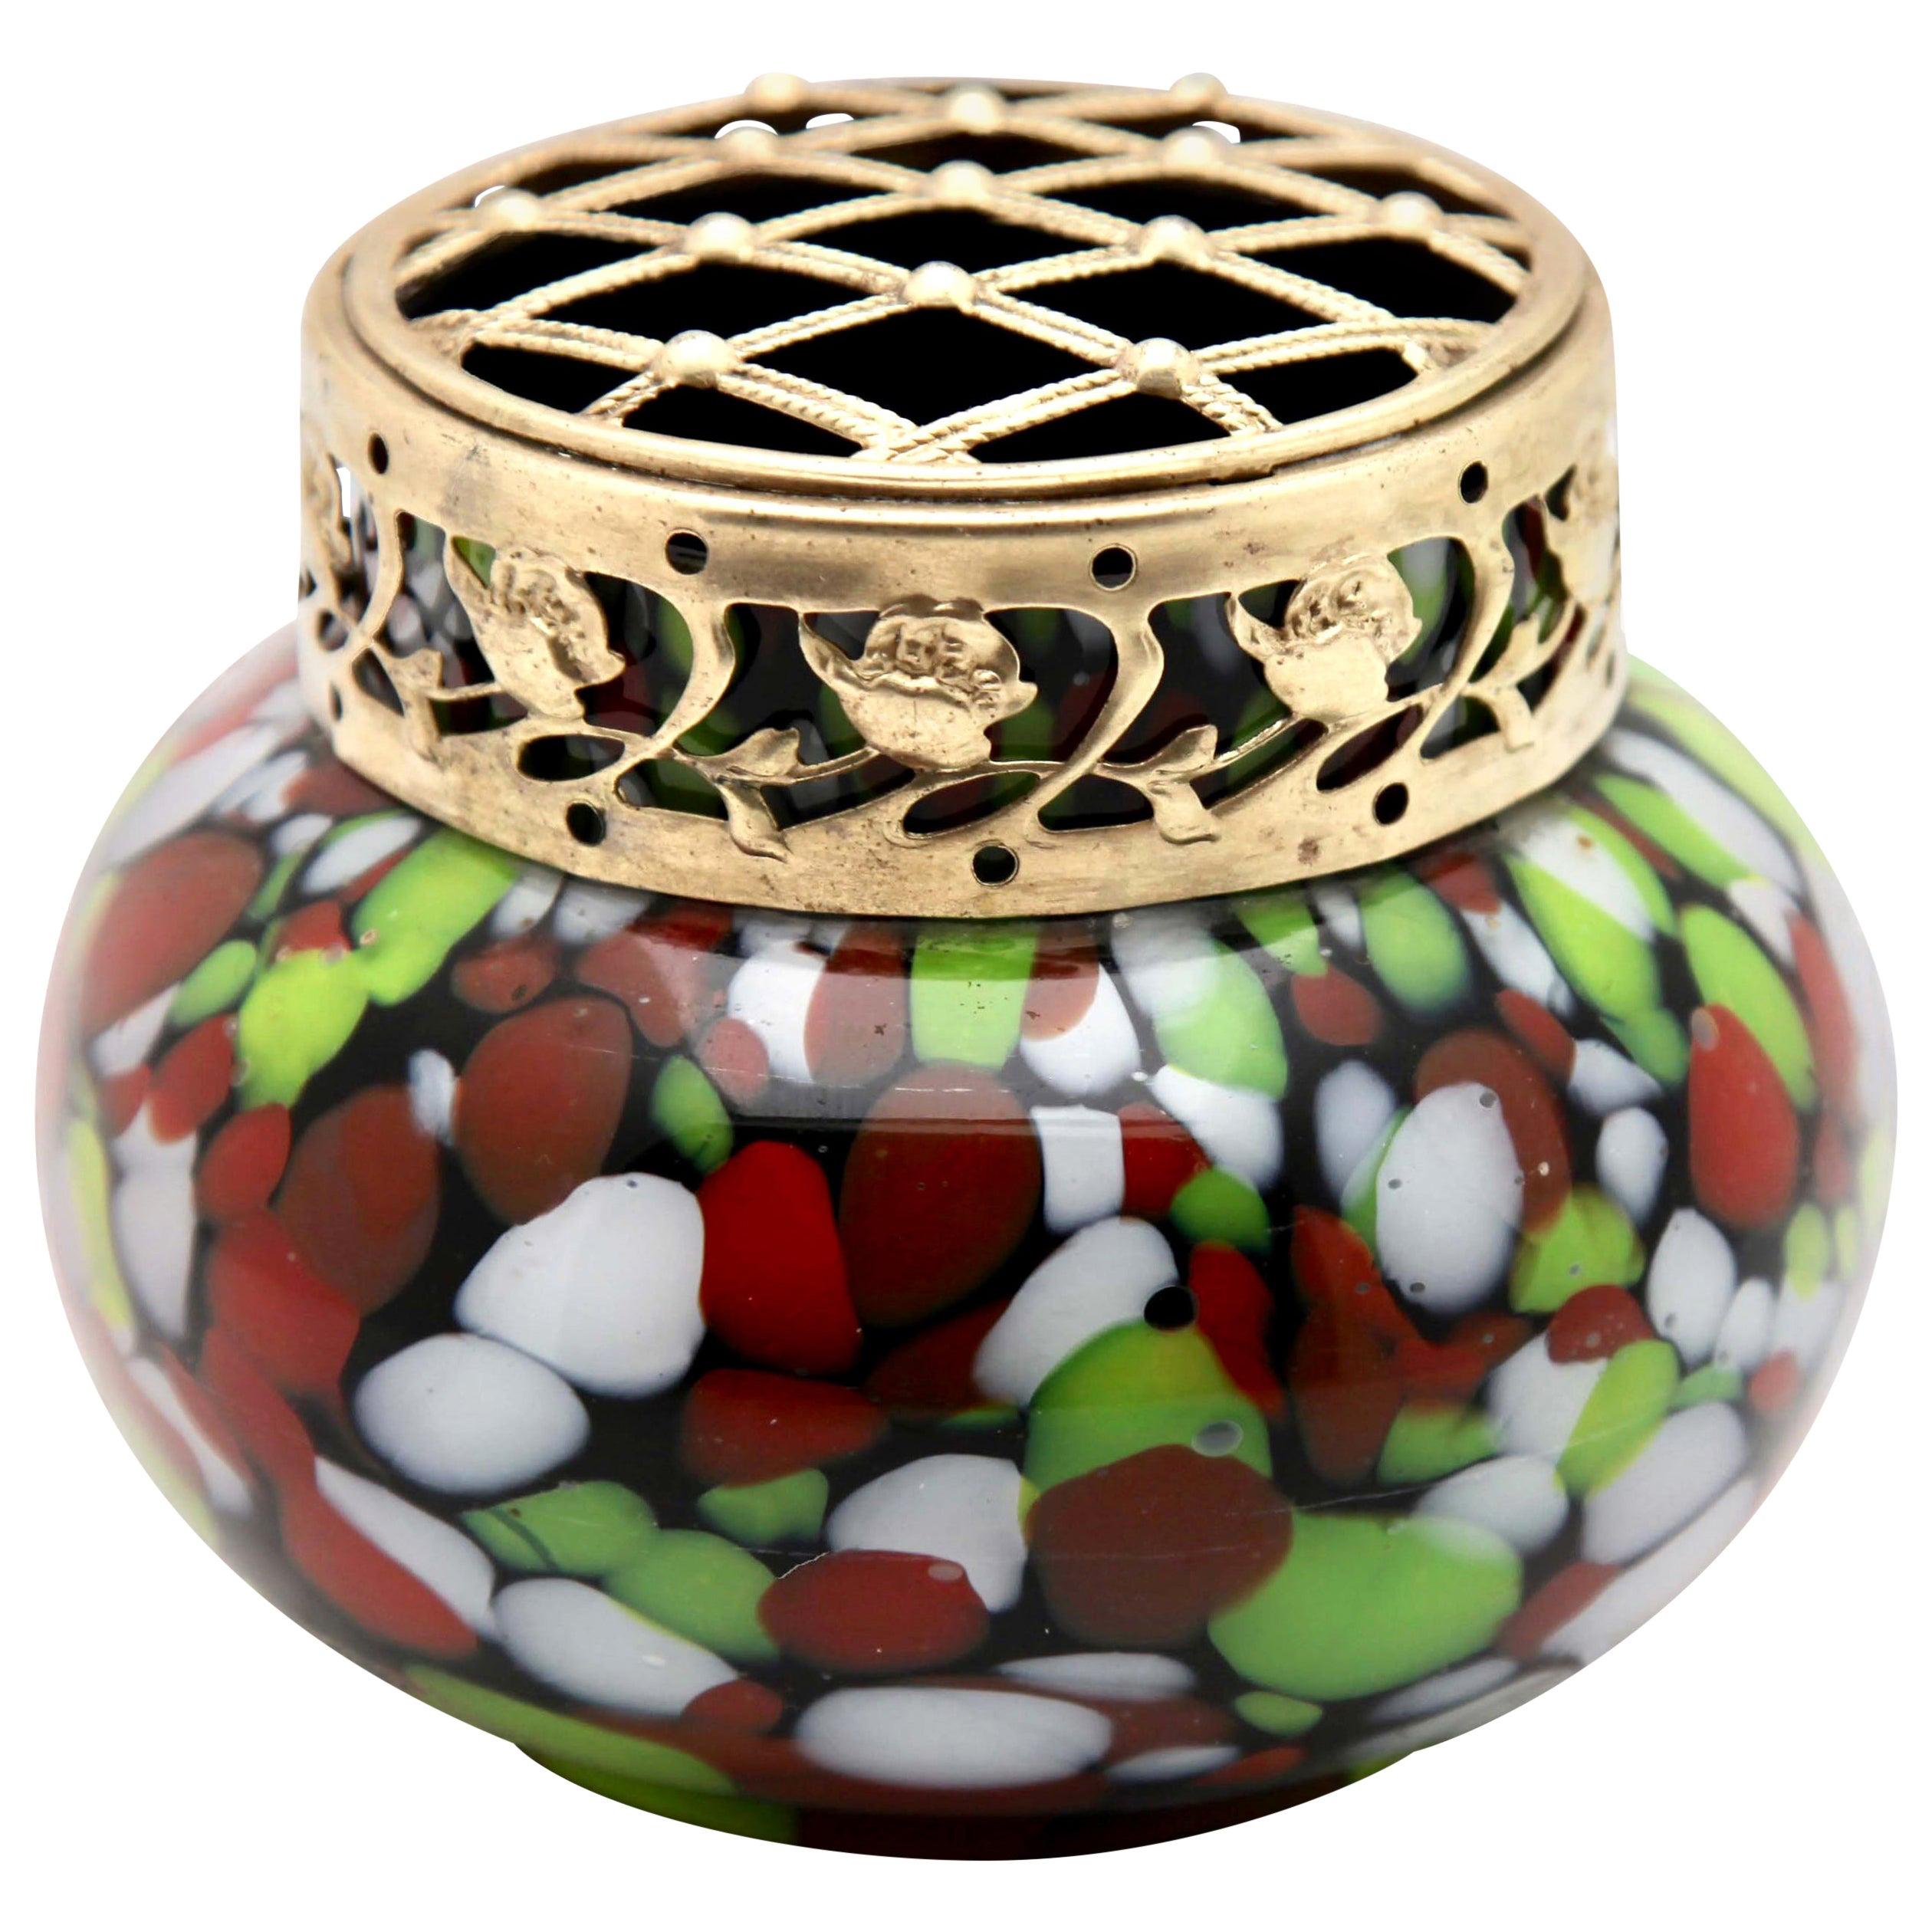 'Pique Fleurs' Vase in Red, White, Green Splatter Colors, with Grille